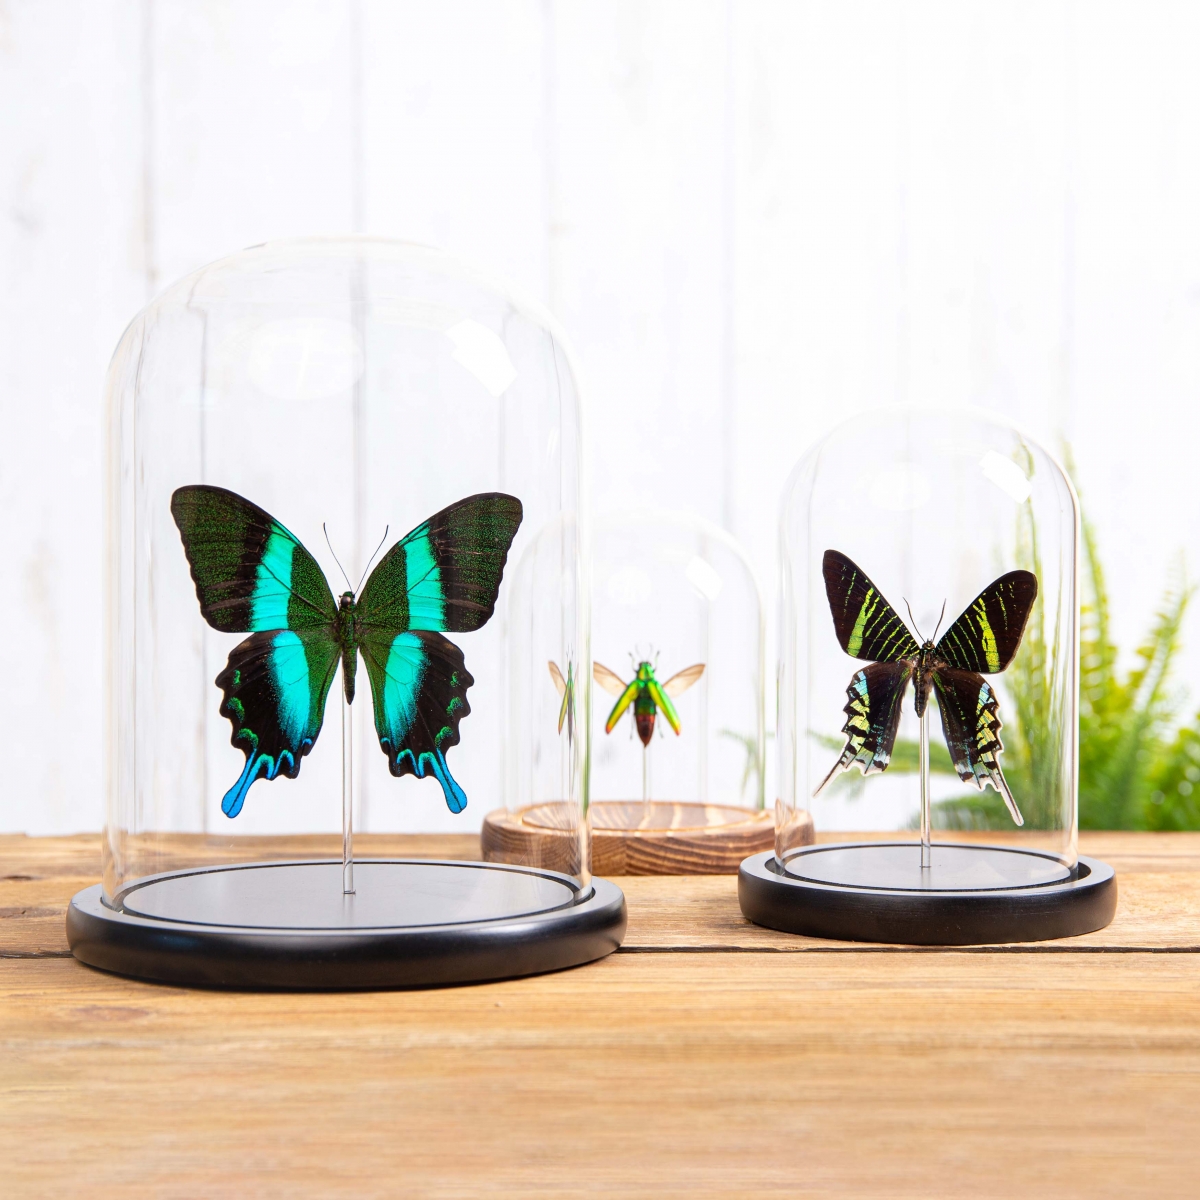 Menelaus Blue Morpho Butterfly in Glass Dome with Wooden Base (Morpho menelaus)